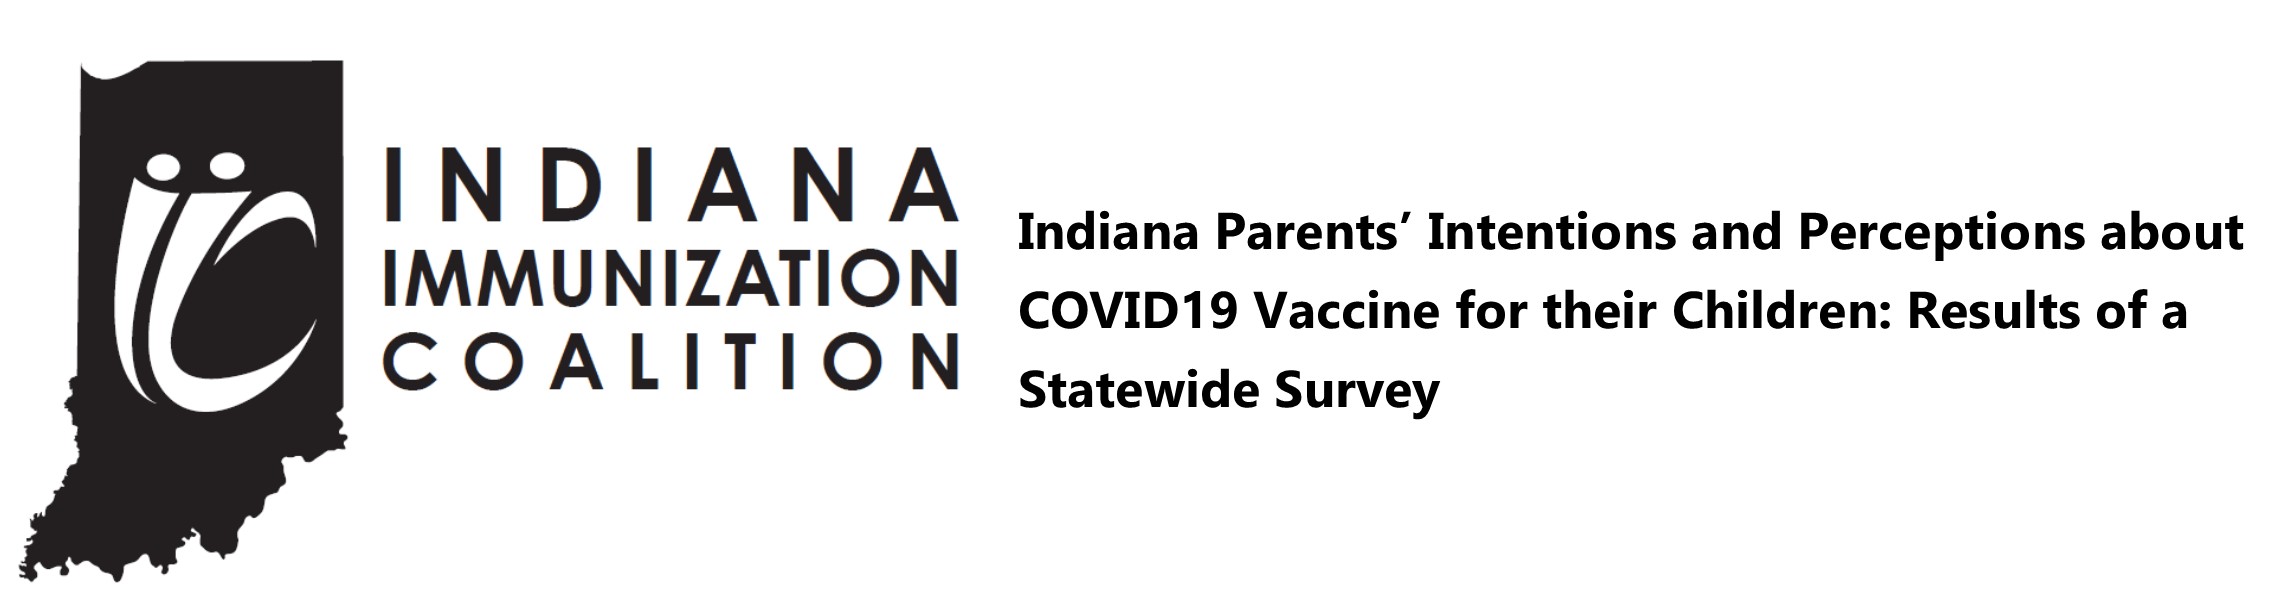 Indiana Parents' Intentions and Perceptions About COVID 19 Vaccine for their Children: A result of a statewide Survey Banner